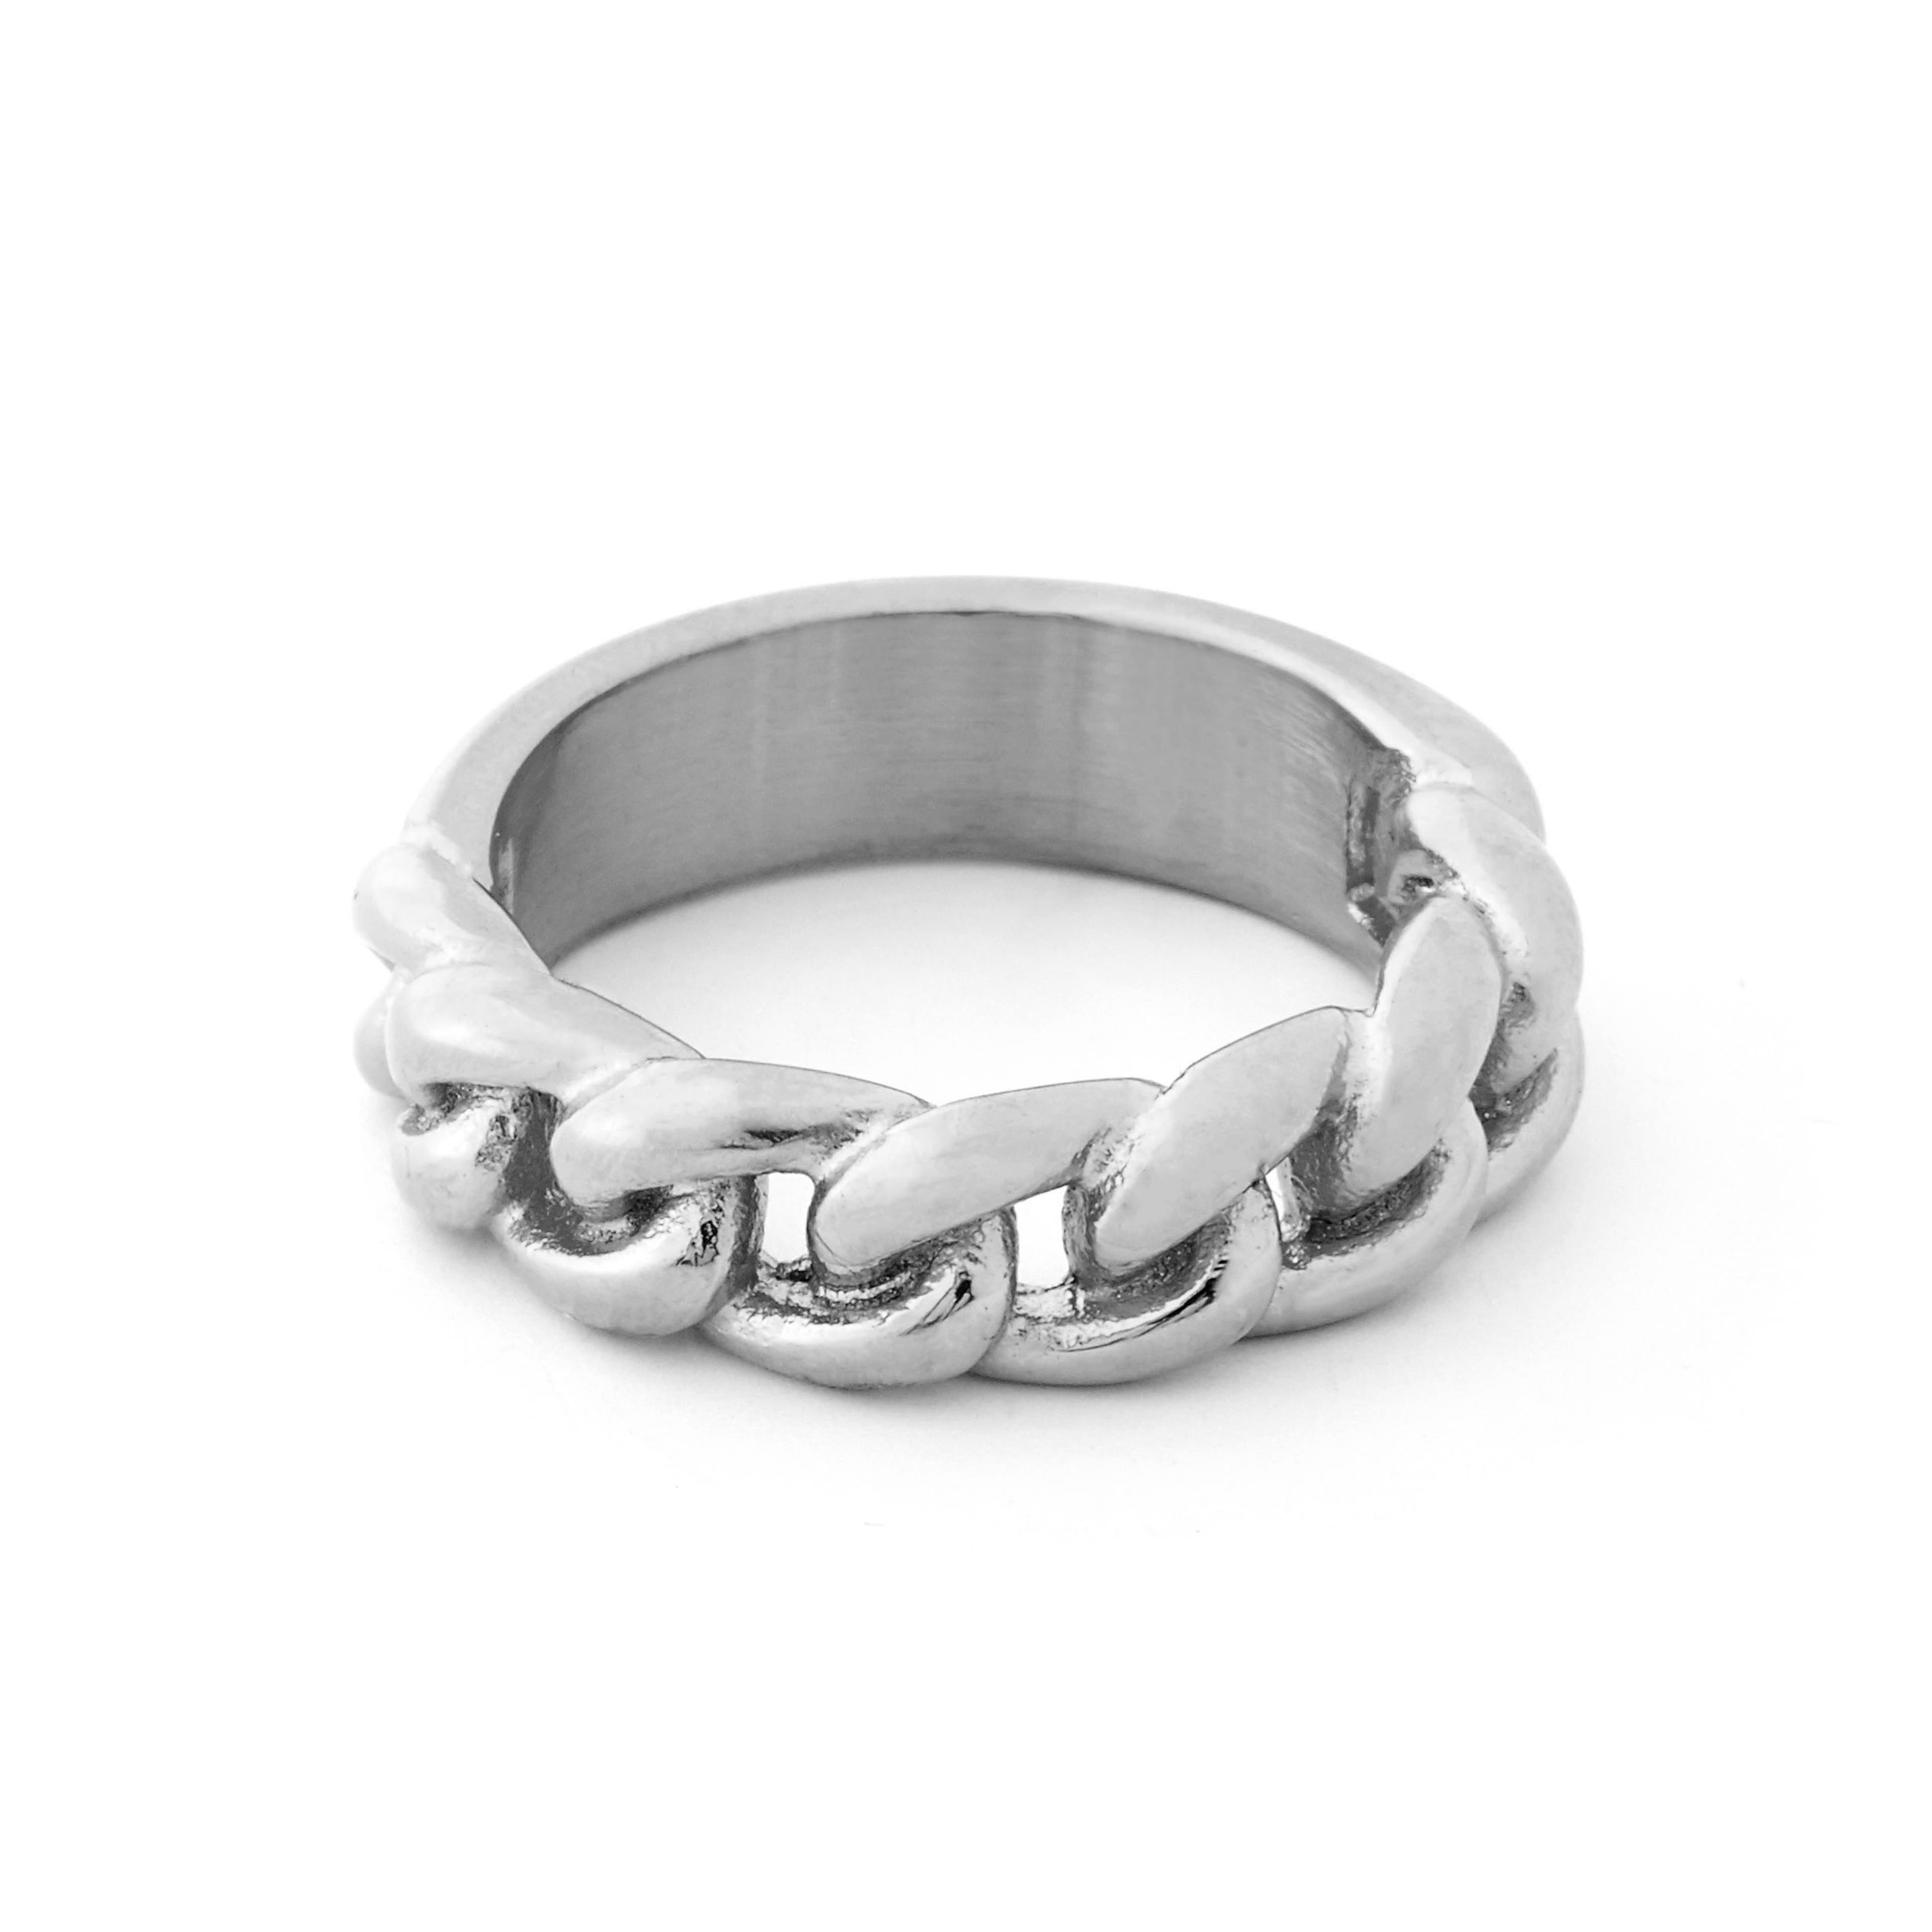 6 mm Silver-Tone Stainless Steel With Half Chain Band Ring